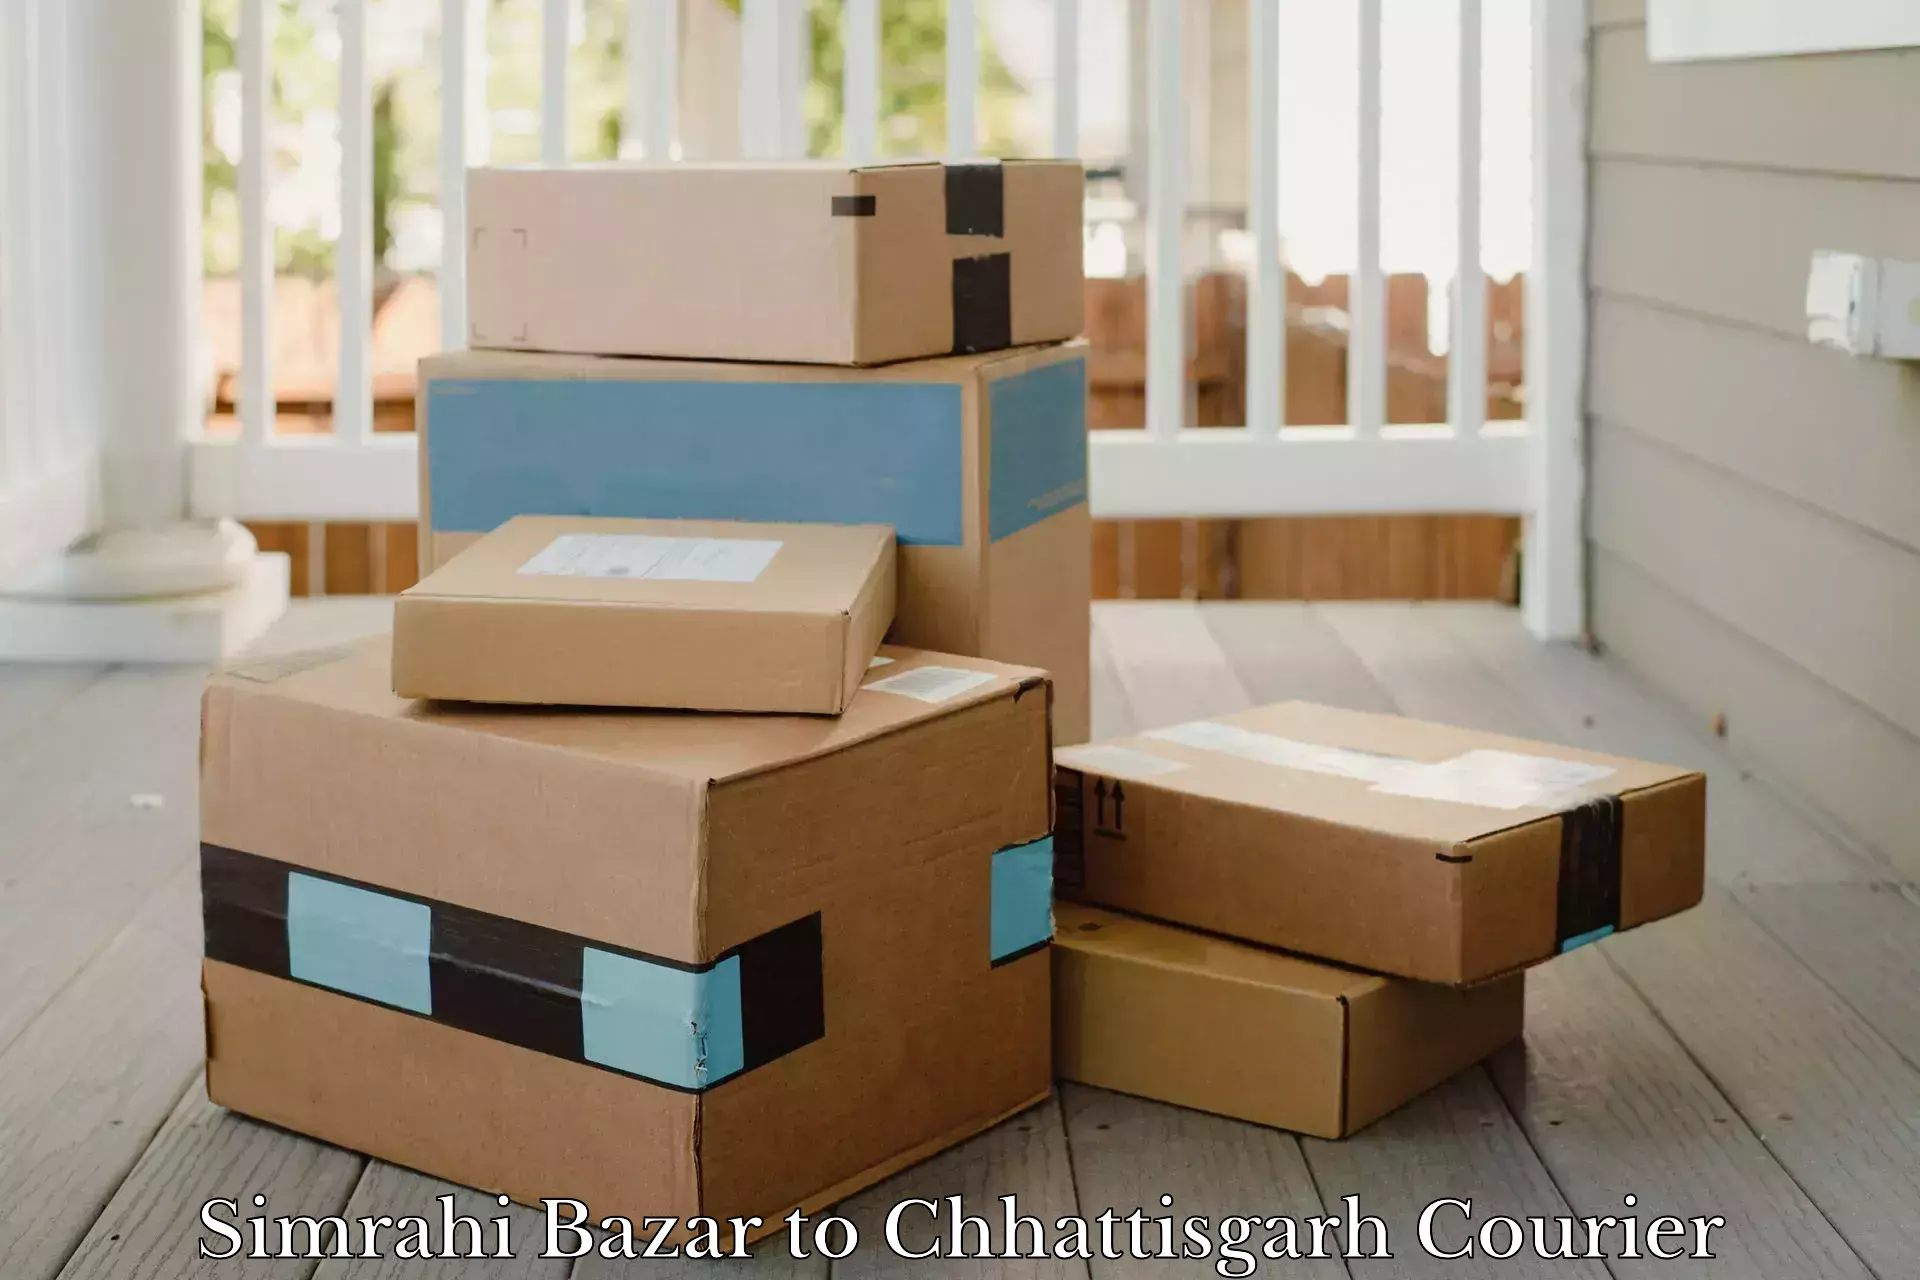 Overnight delivery services in Simrahi Bazar to Chhattisgarh